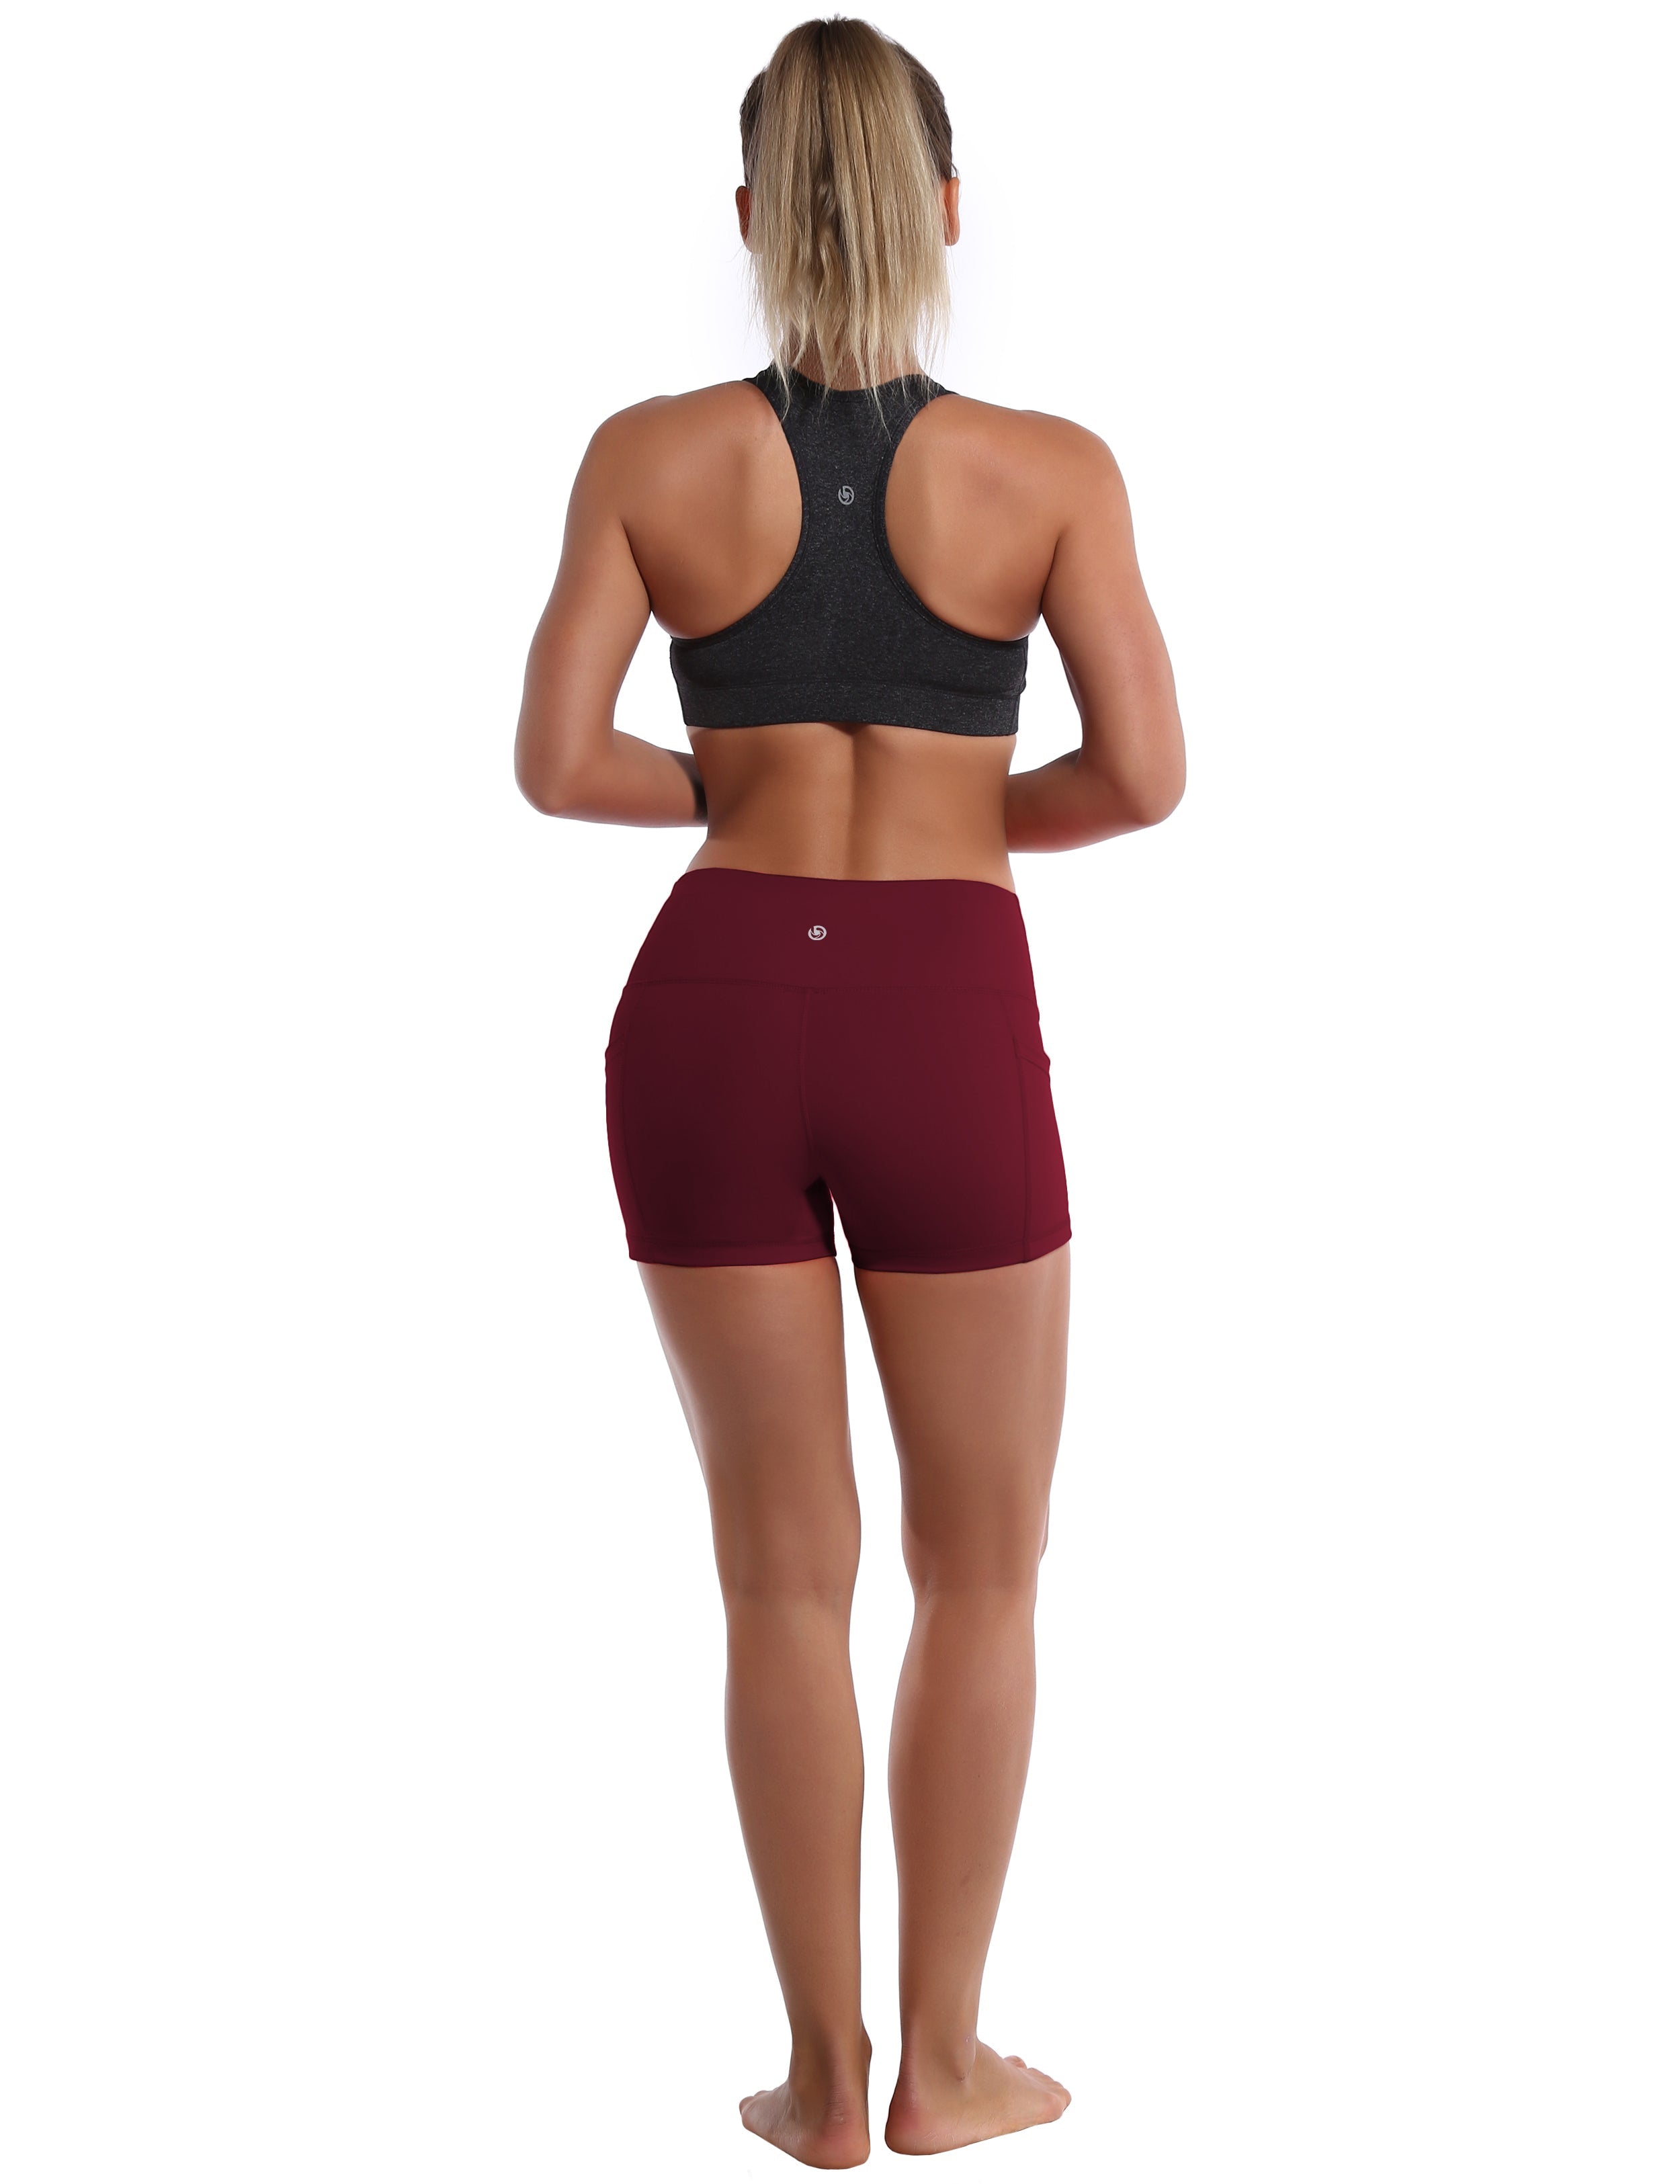 2.5" Side Pockets Biking Shorts cherryred Sleek, soft, smooth and totally comfortable: our newest sexy style is here. Softest-ever fabric High elasticity High density 4-way stretch Fabric doesn't attract lint easily No see-through Moisture-wicking Machine wash 78% Polyester, 22% Spandex